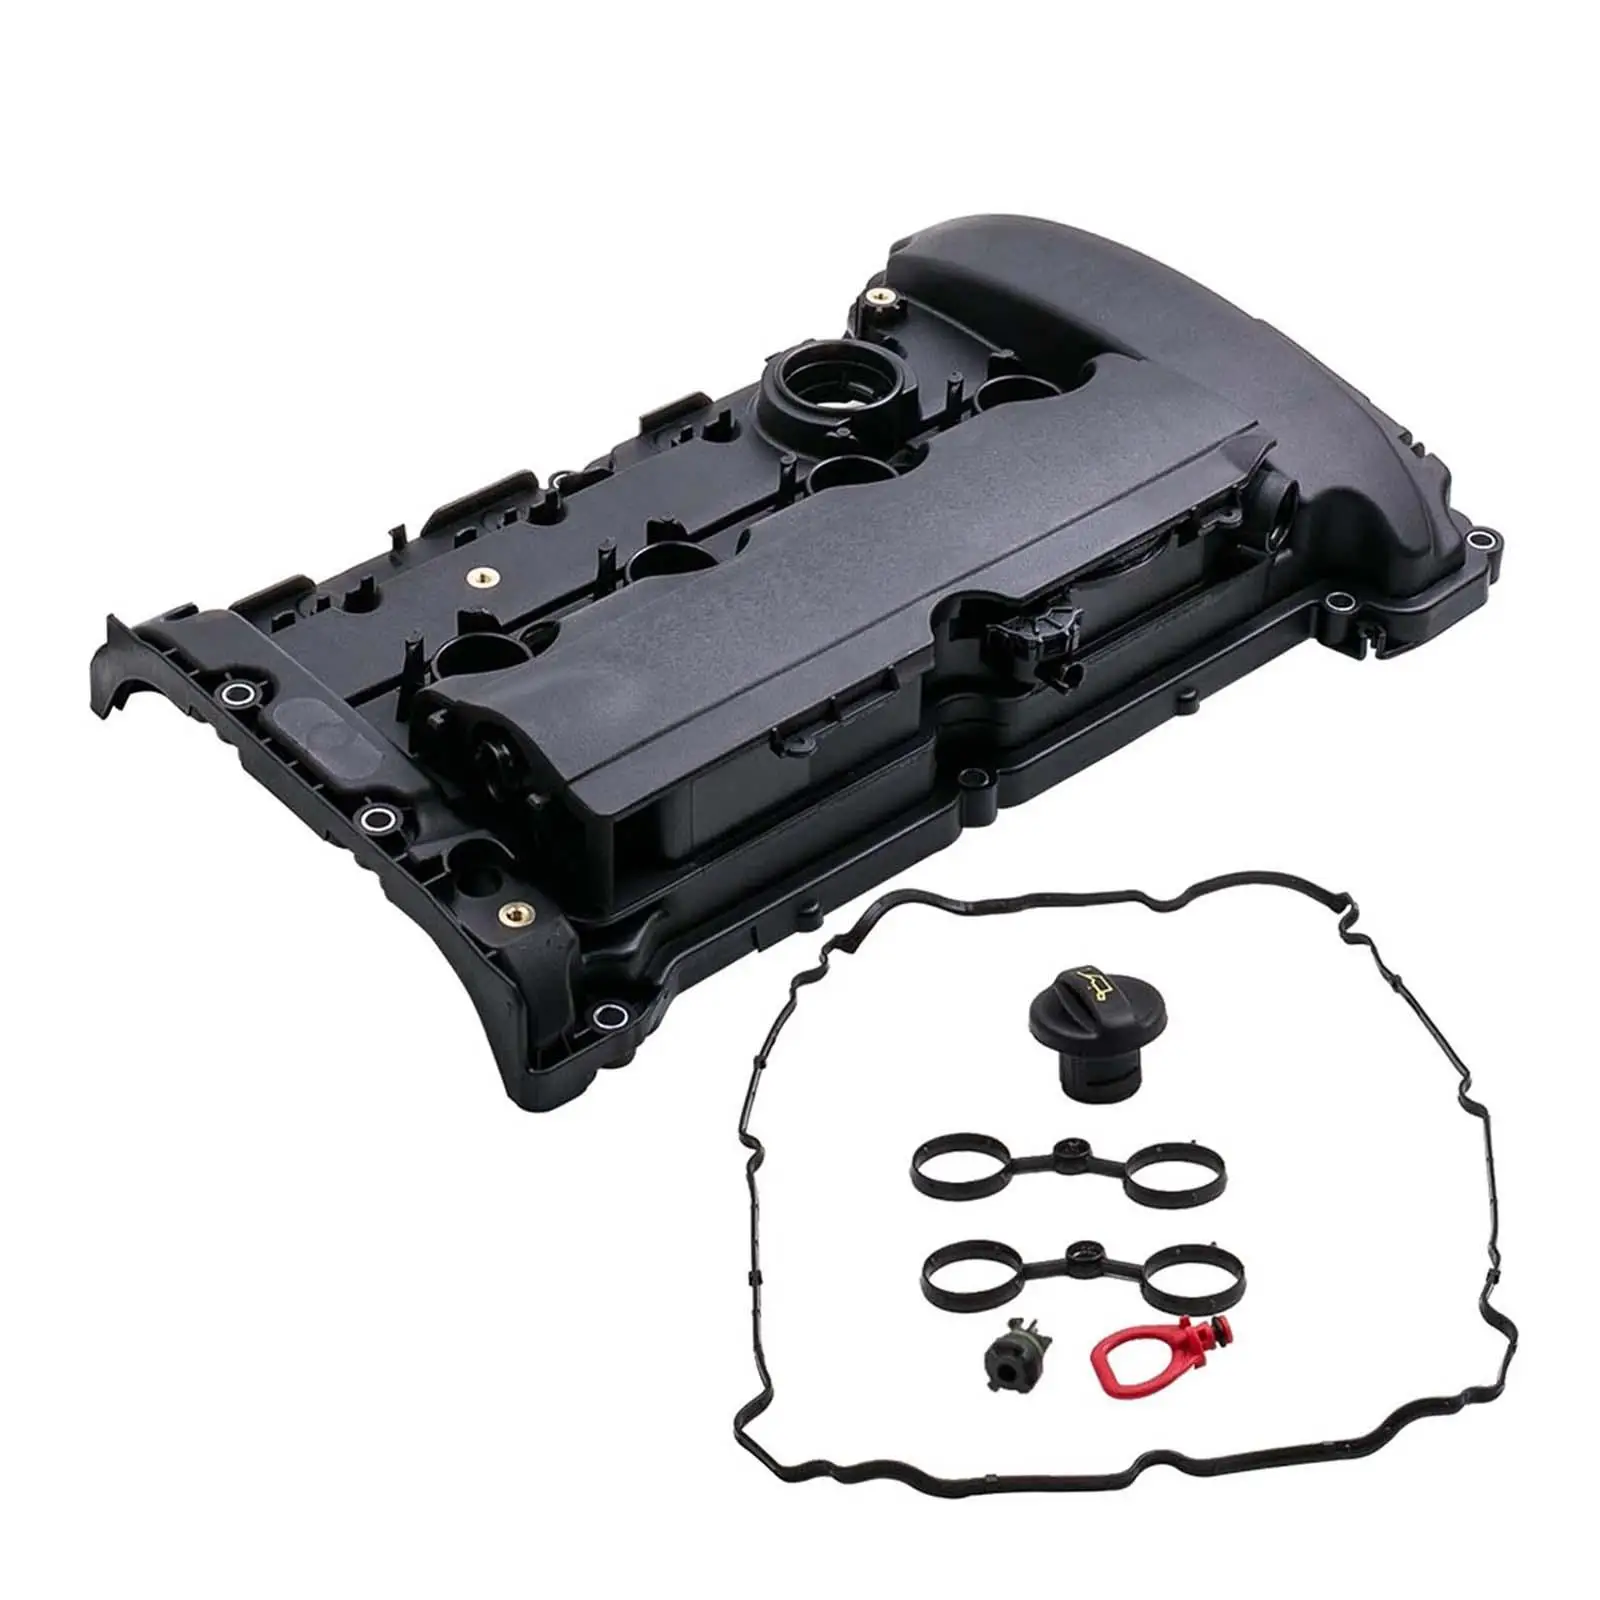 High Performance Engine Valve Cover for Mini Cooper S Jcw 1.6L Accessory Assembly